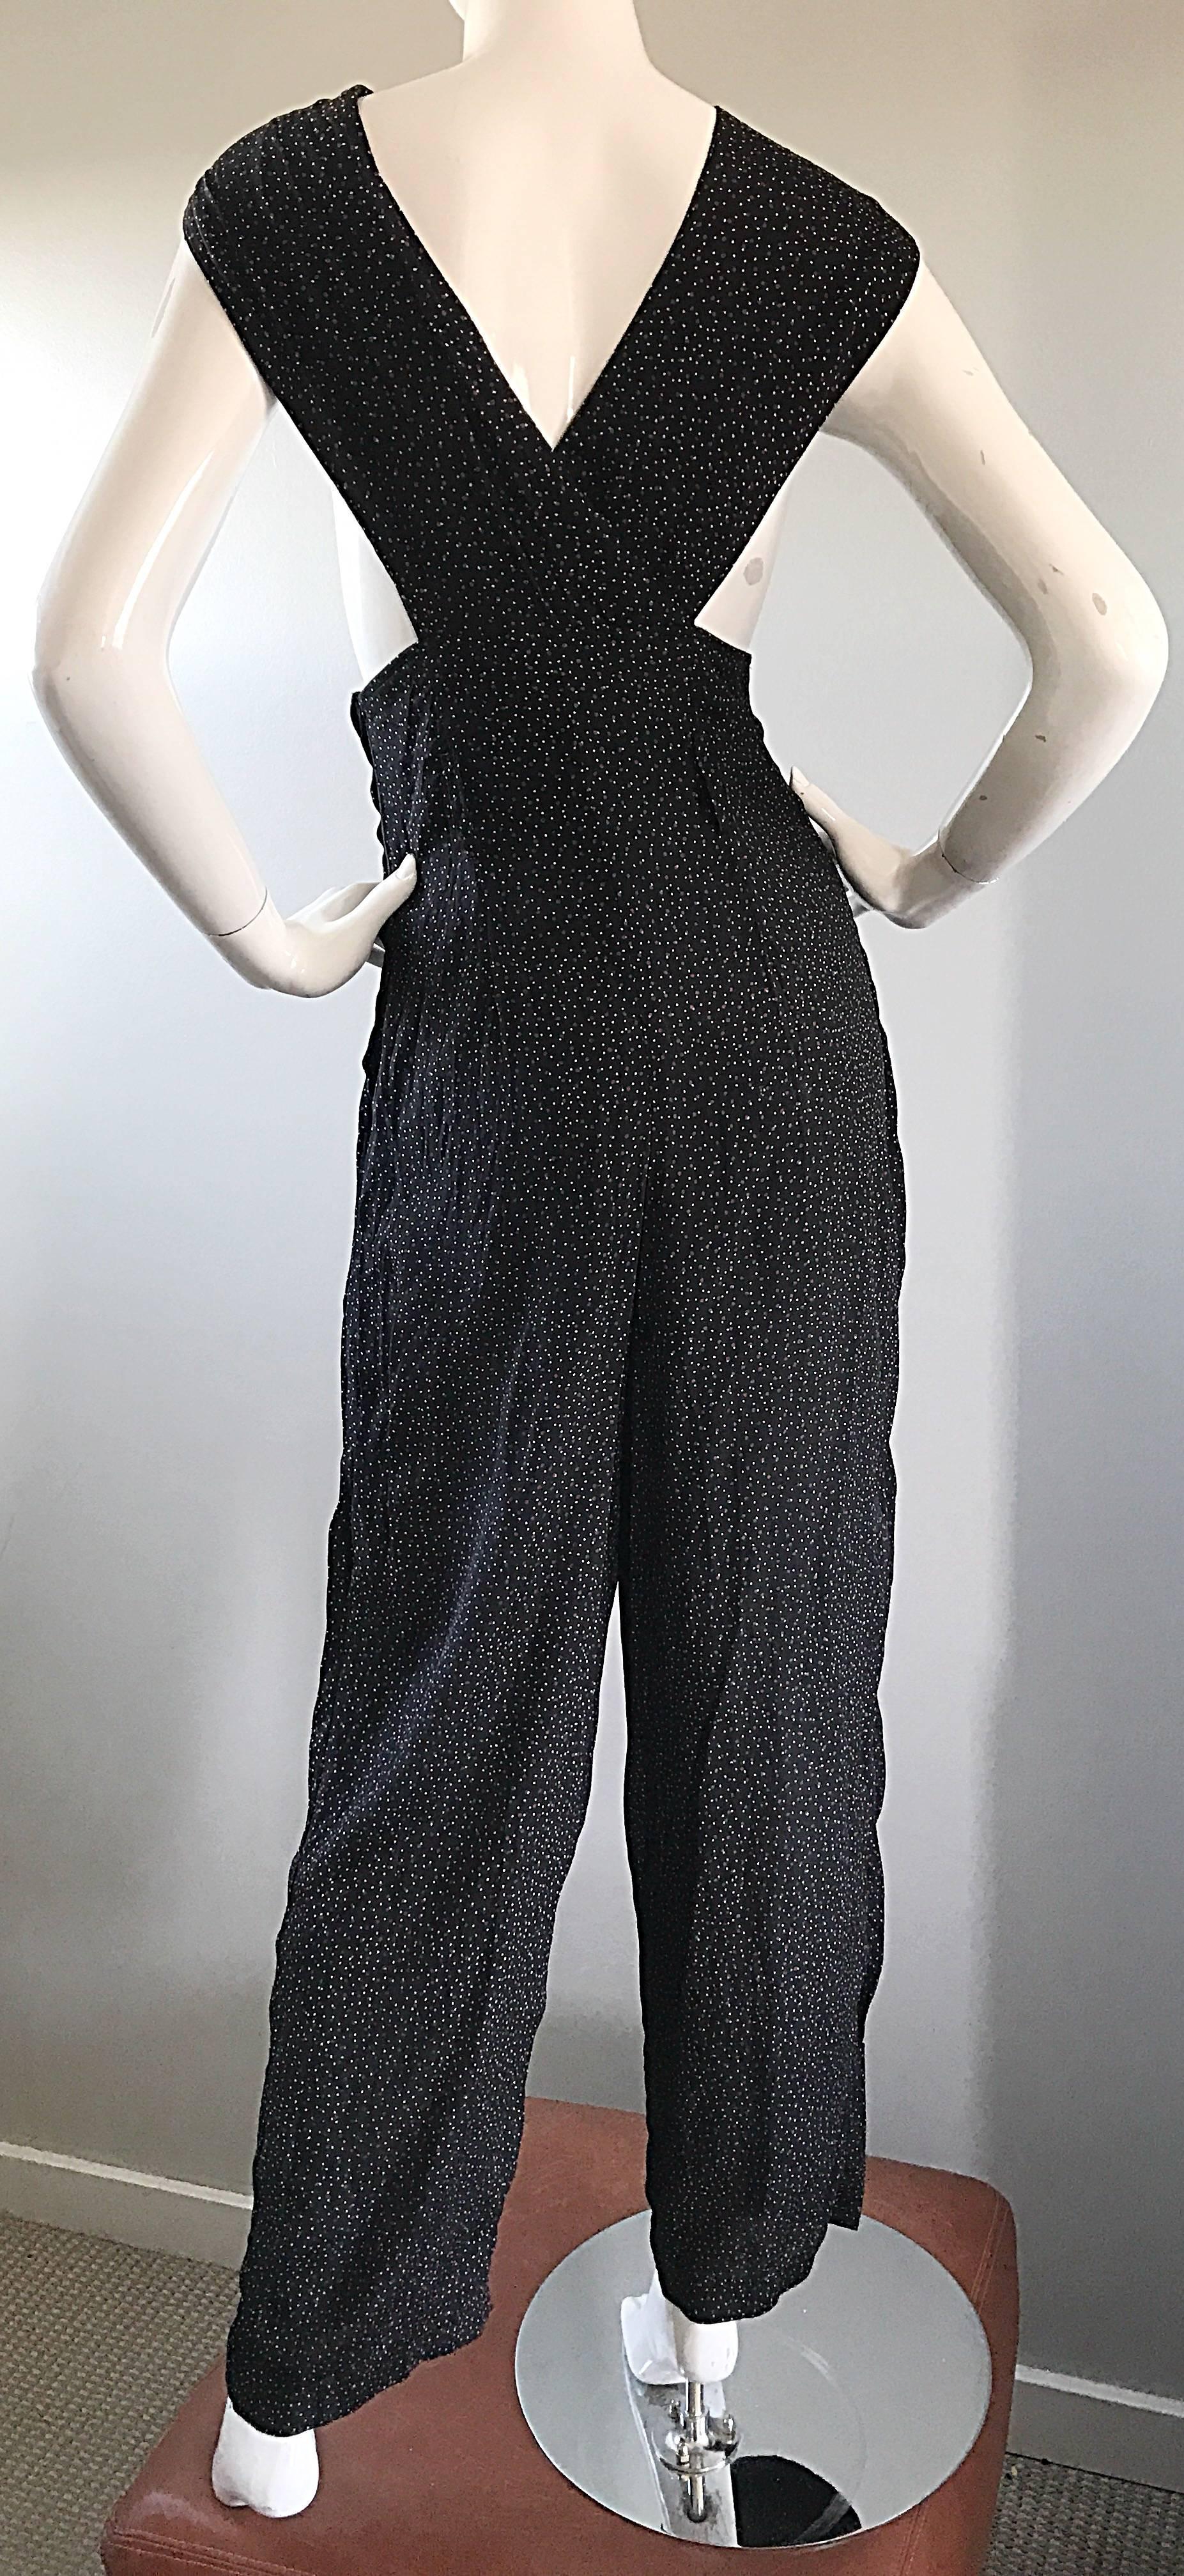 Avant Garde Vintage Shelli Segal 1990s Black + Brown + White Polka Dot Jumpsuit In Excellent Condition For Sale In San Diego, CA